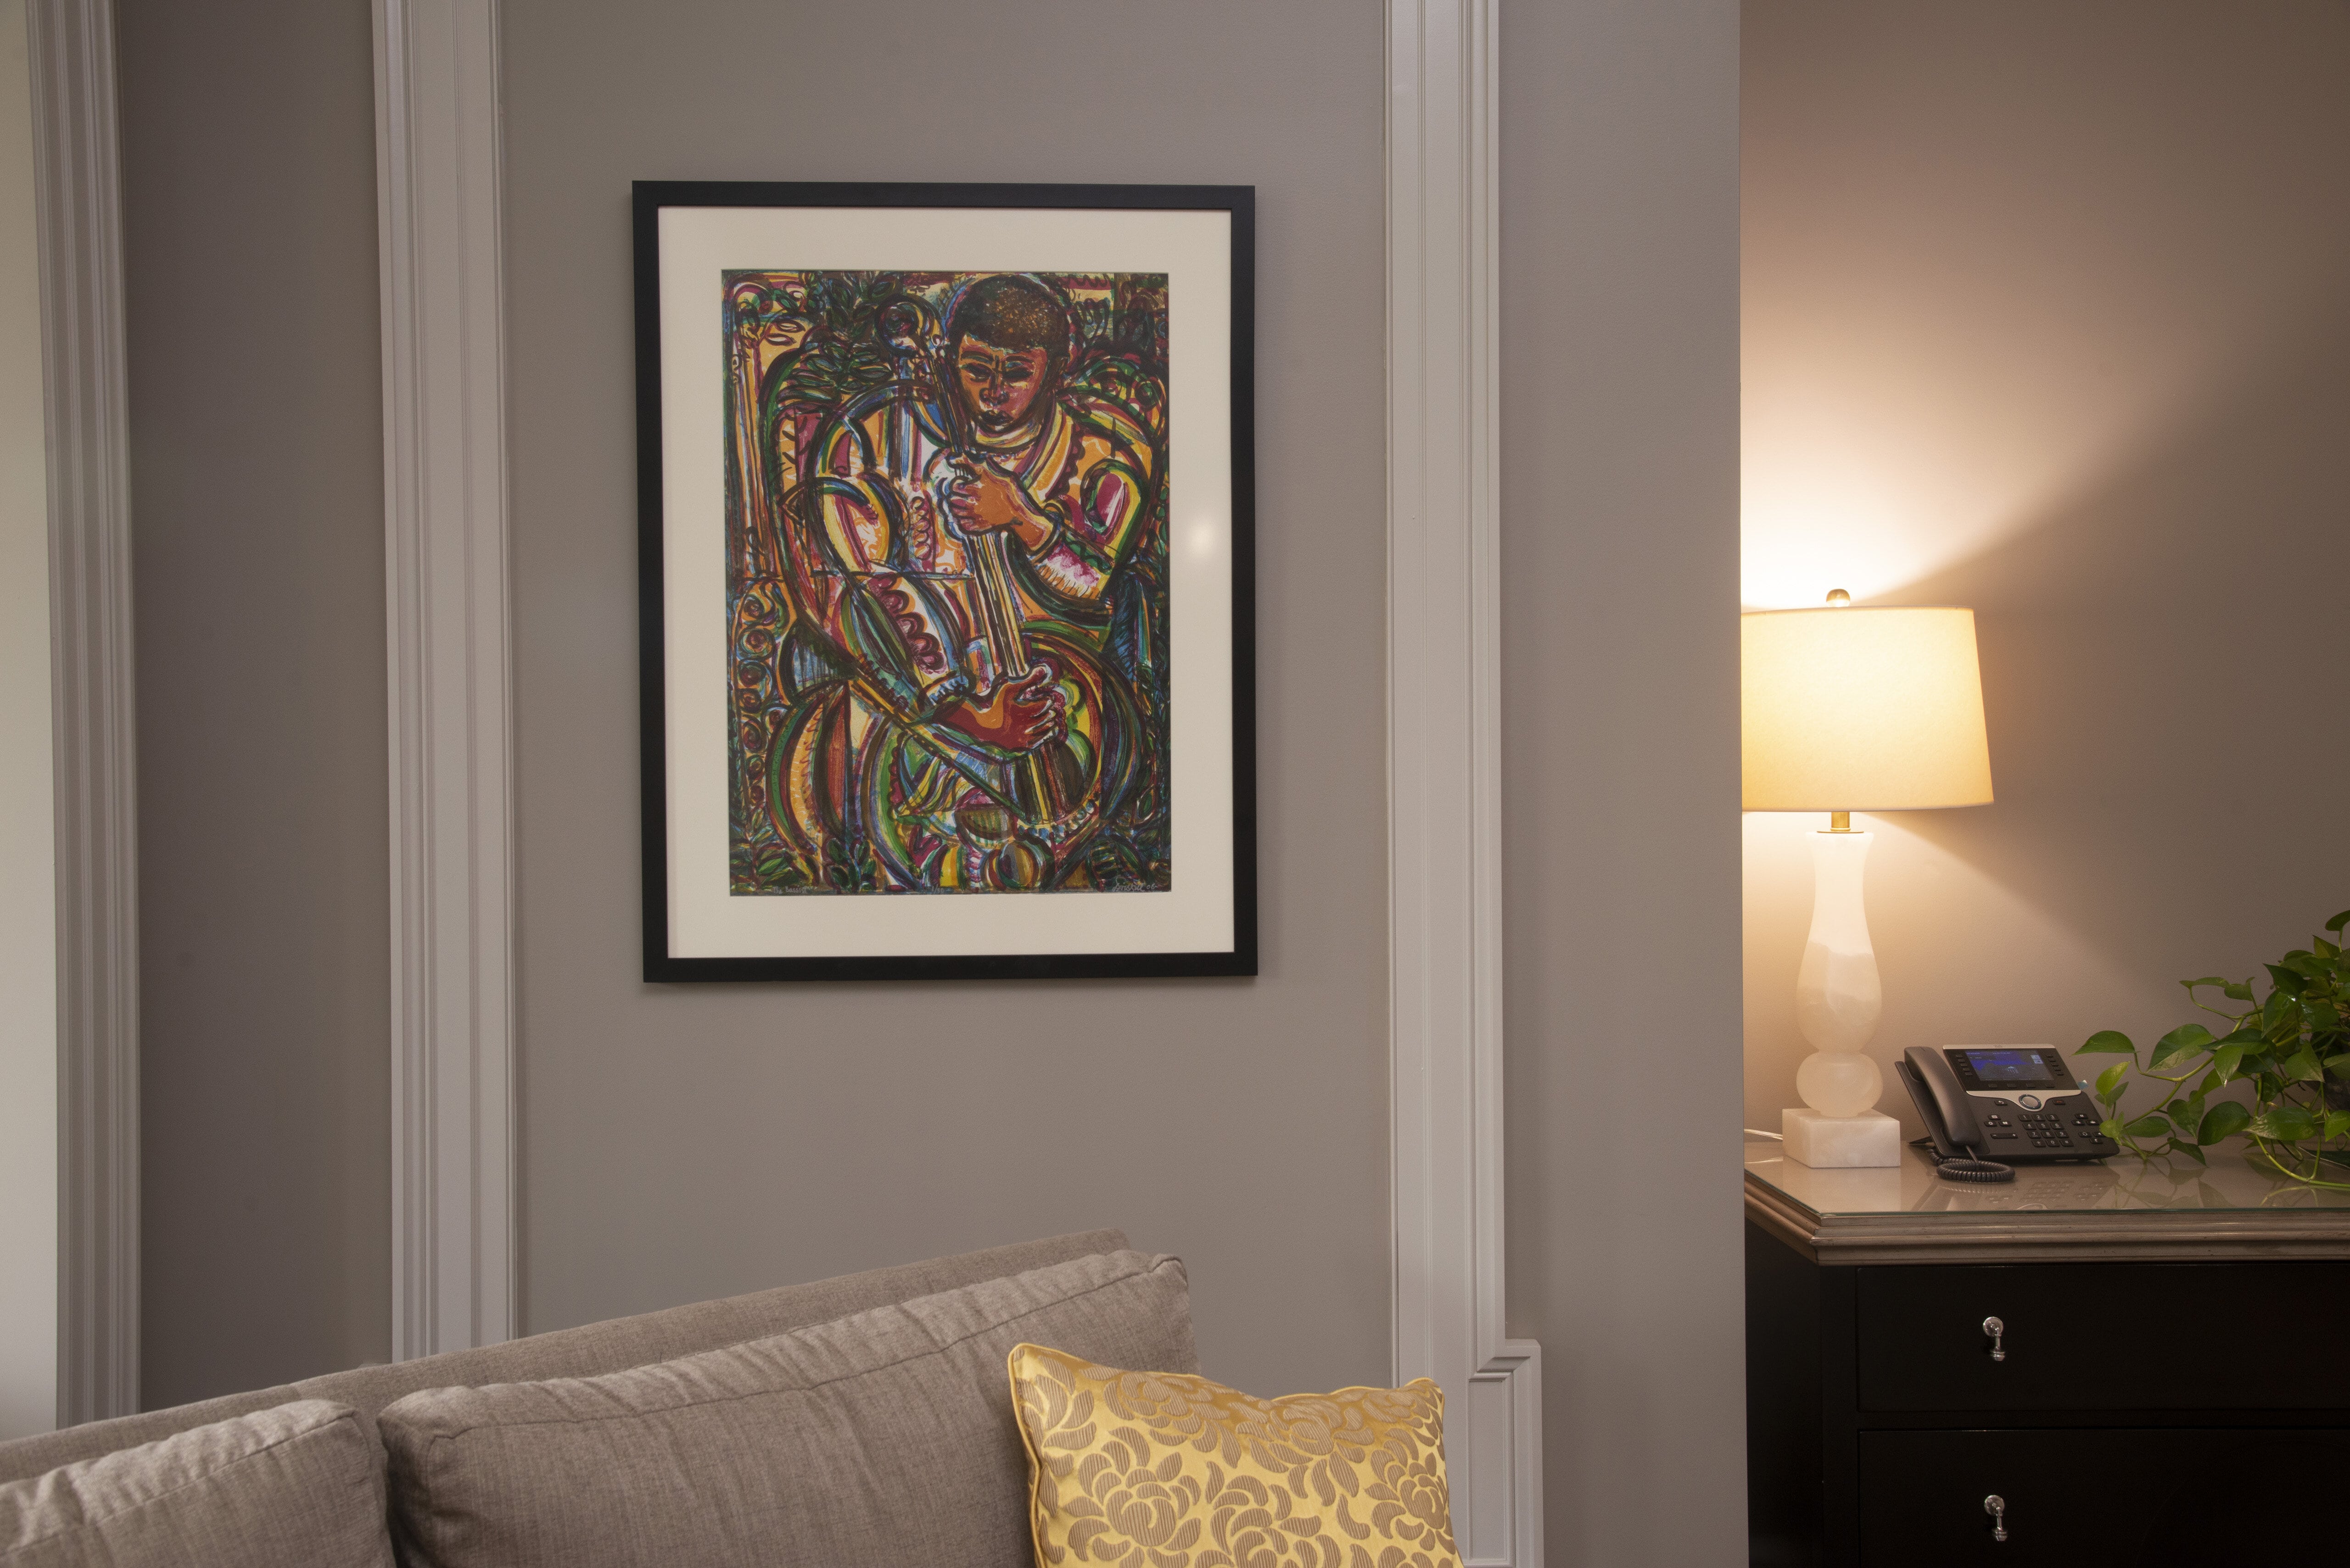 David C. Driskell's print The Bassist is hanging on a wall over a chair.